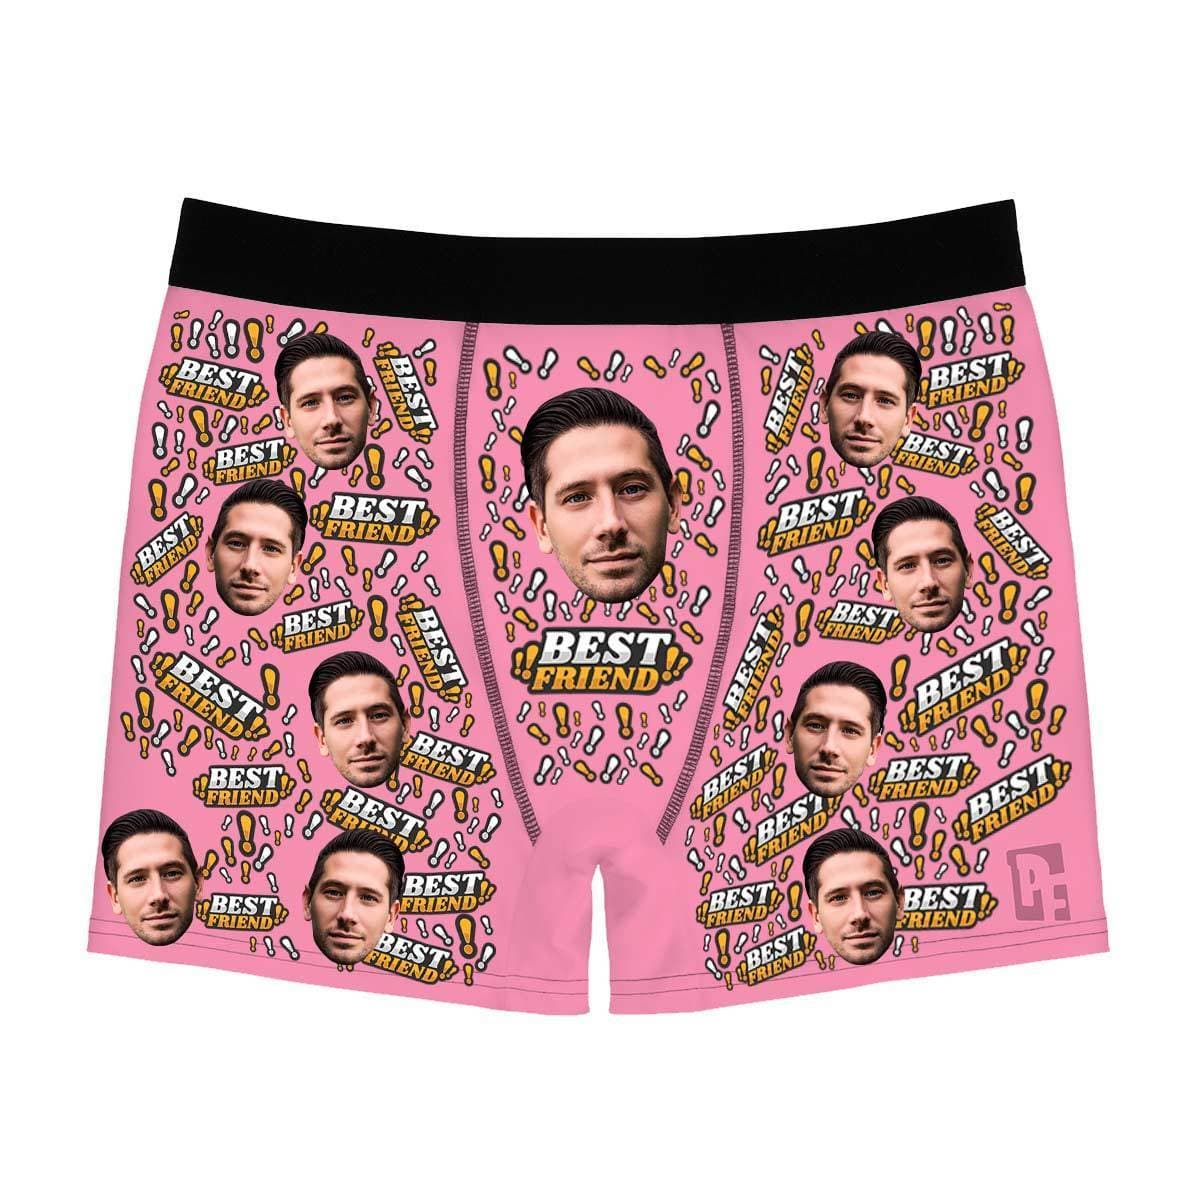 Pink Best Friend men's boxer briefs personalized with photo printed on them